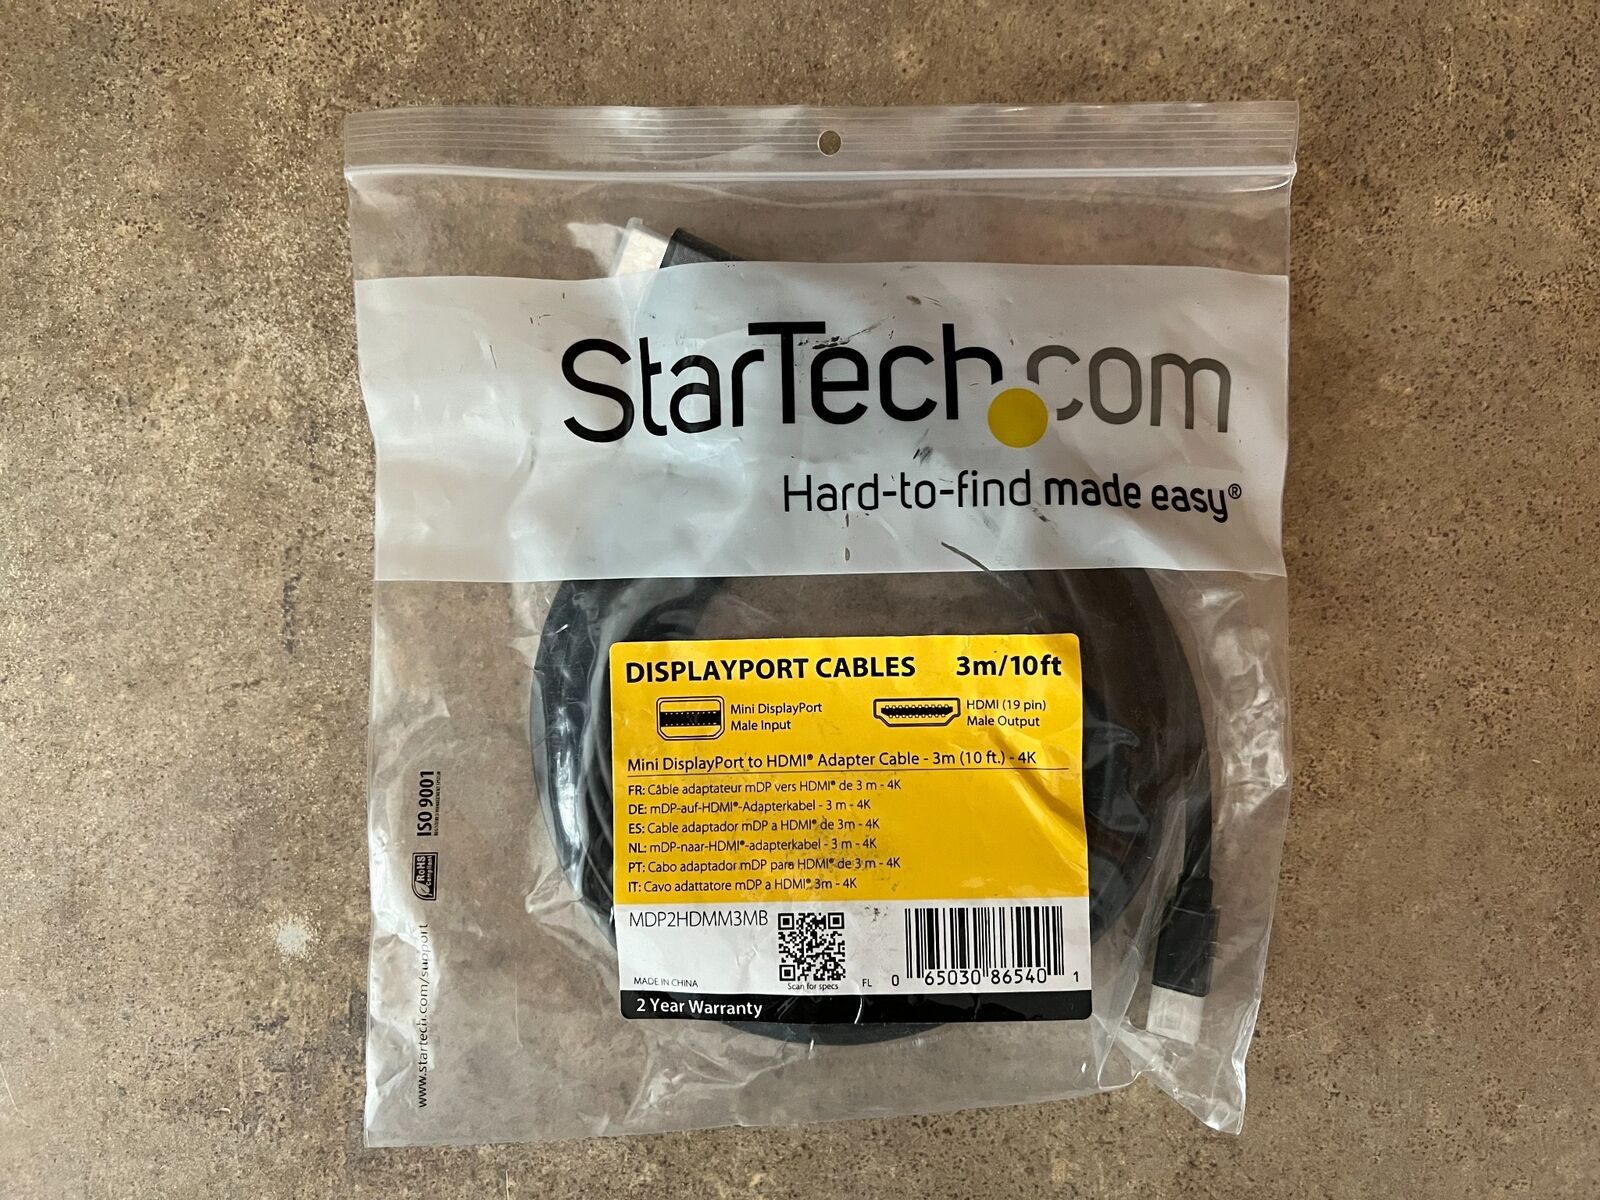 STARTECH.COM MINI DISPLAYPORT TO HDMI ADAPTER CABLE-MDP TO HDMI ADAPTER E2-1(2)